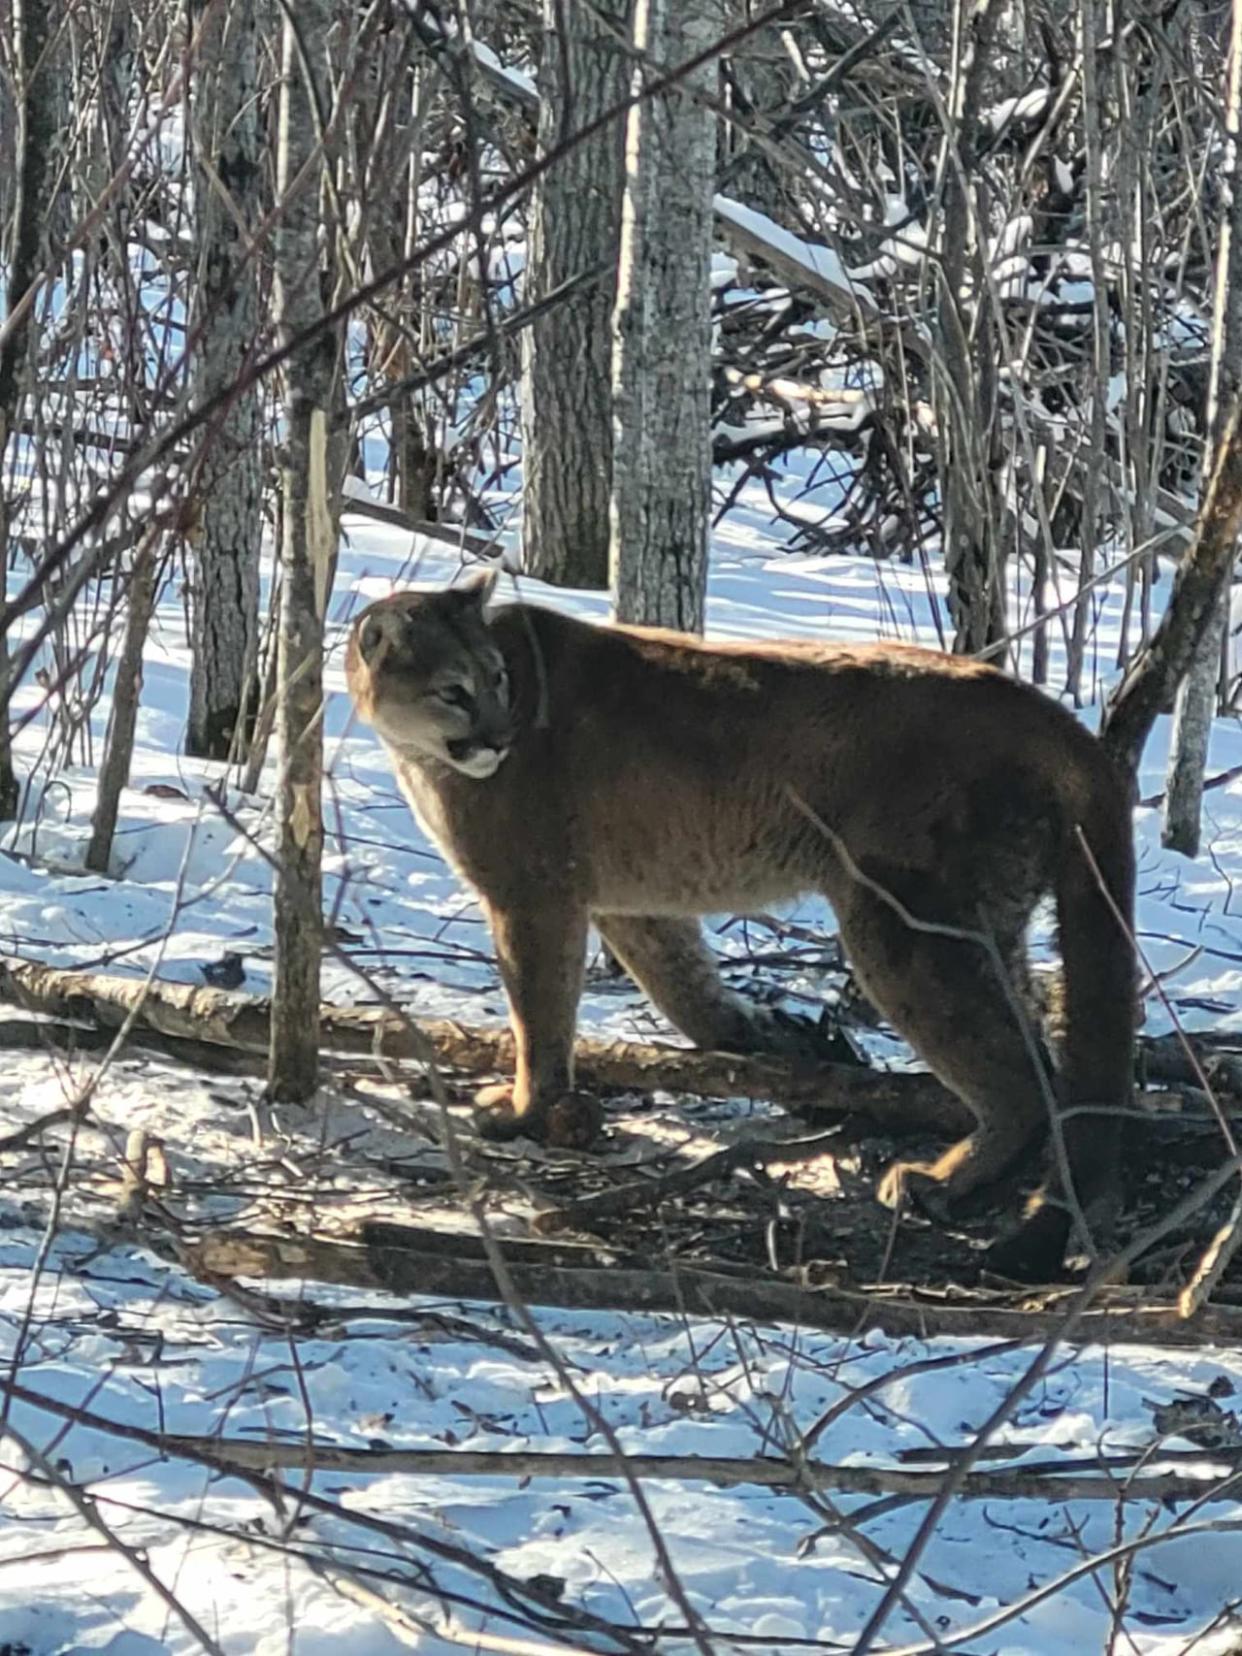 Clint Janzen caught this cougar in one of his traps a few weeks ago. (Submitted by Clint Janzen - image credit)